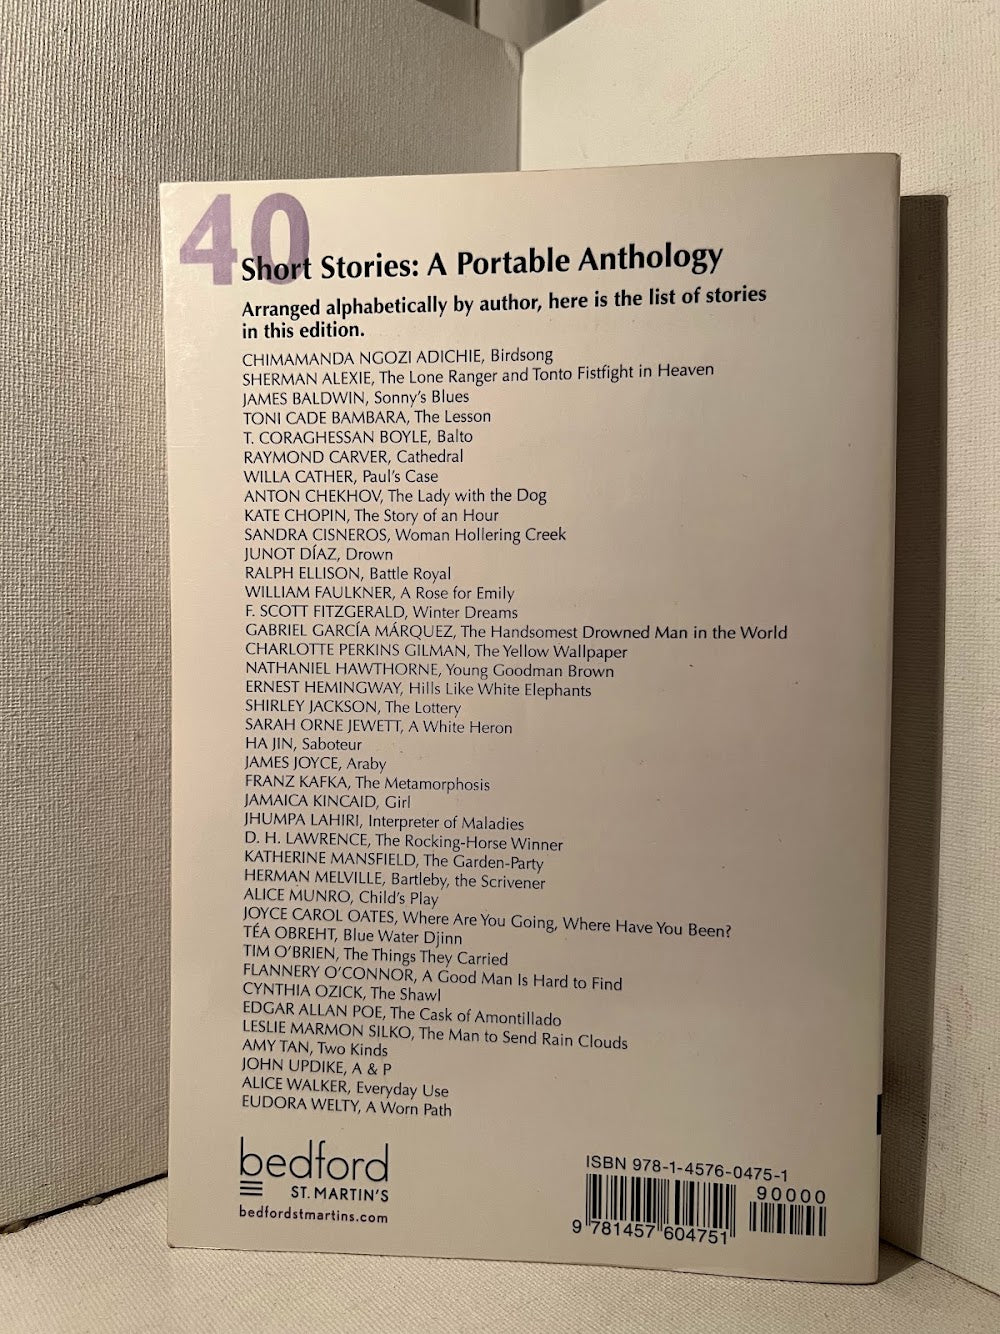 40 Short Stories: A Portable Anthology edited by Beverly Lawn